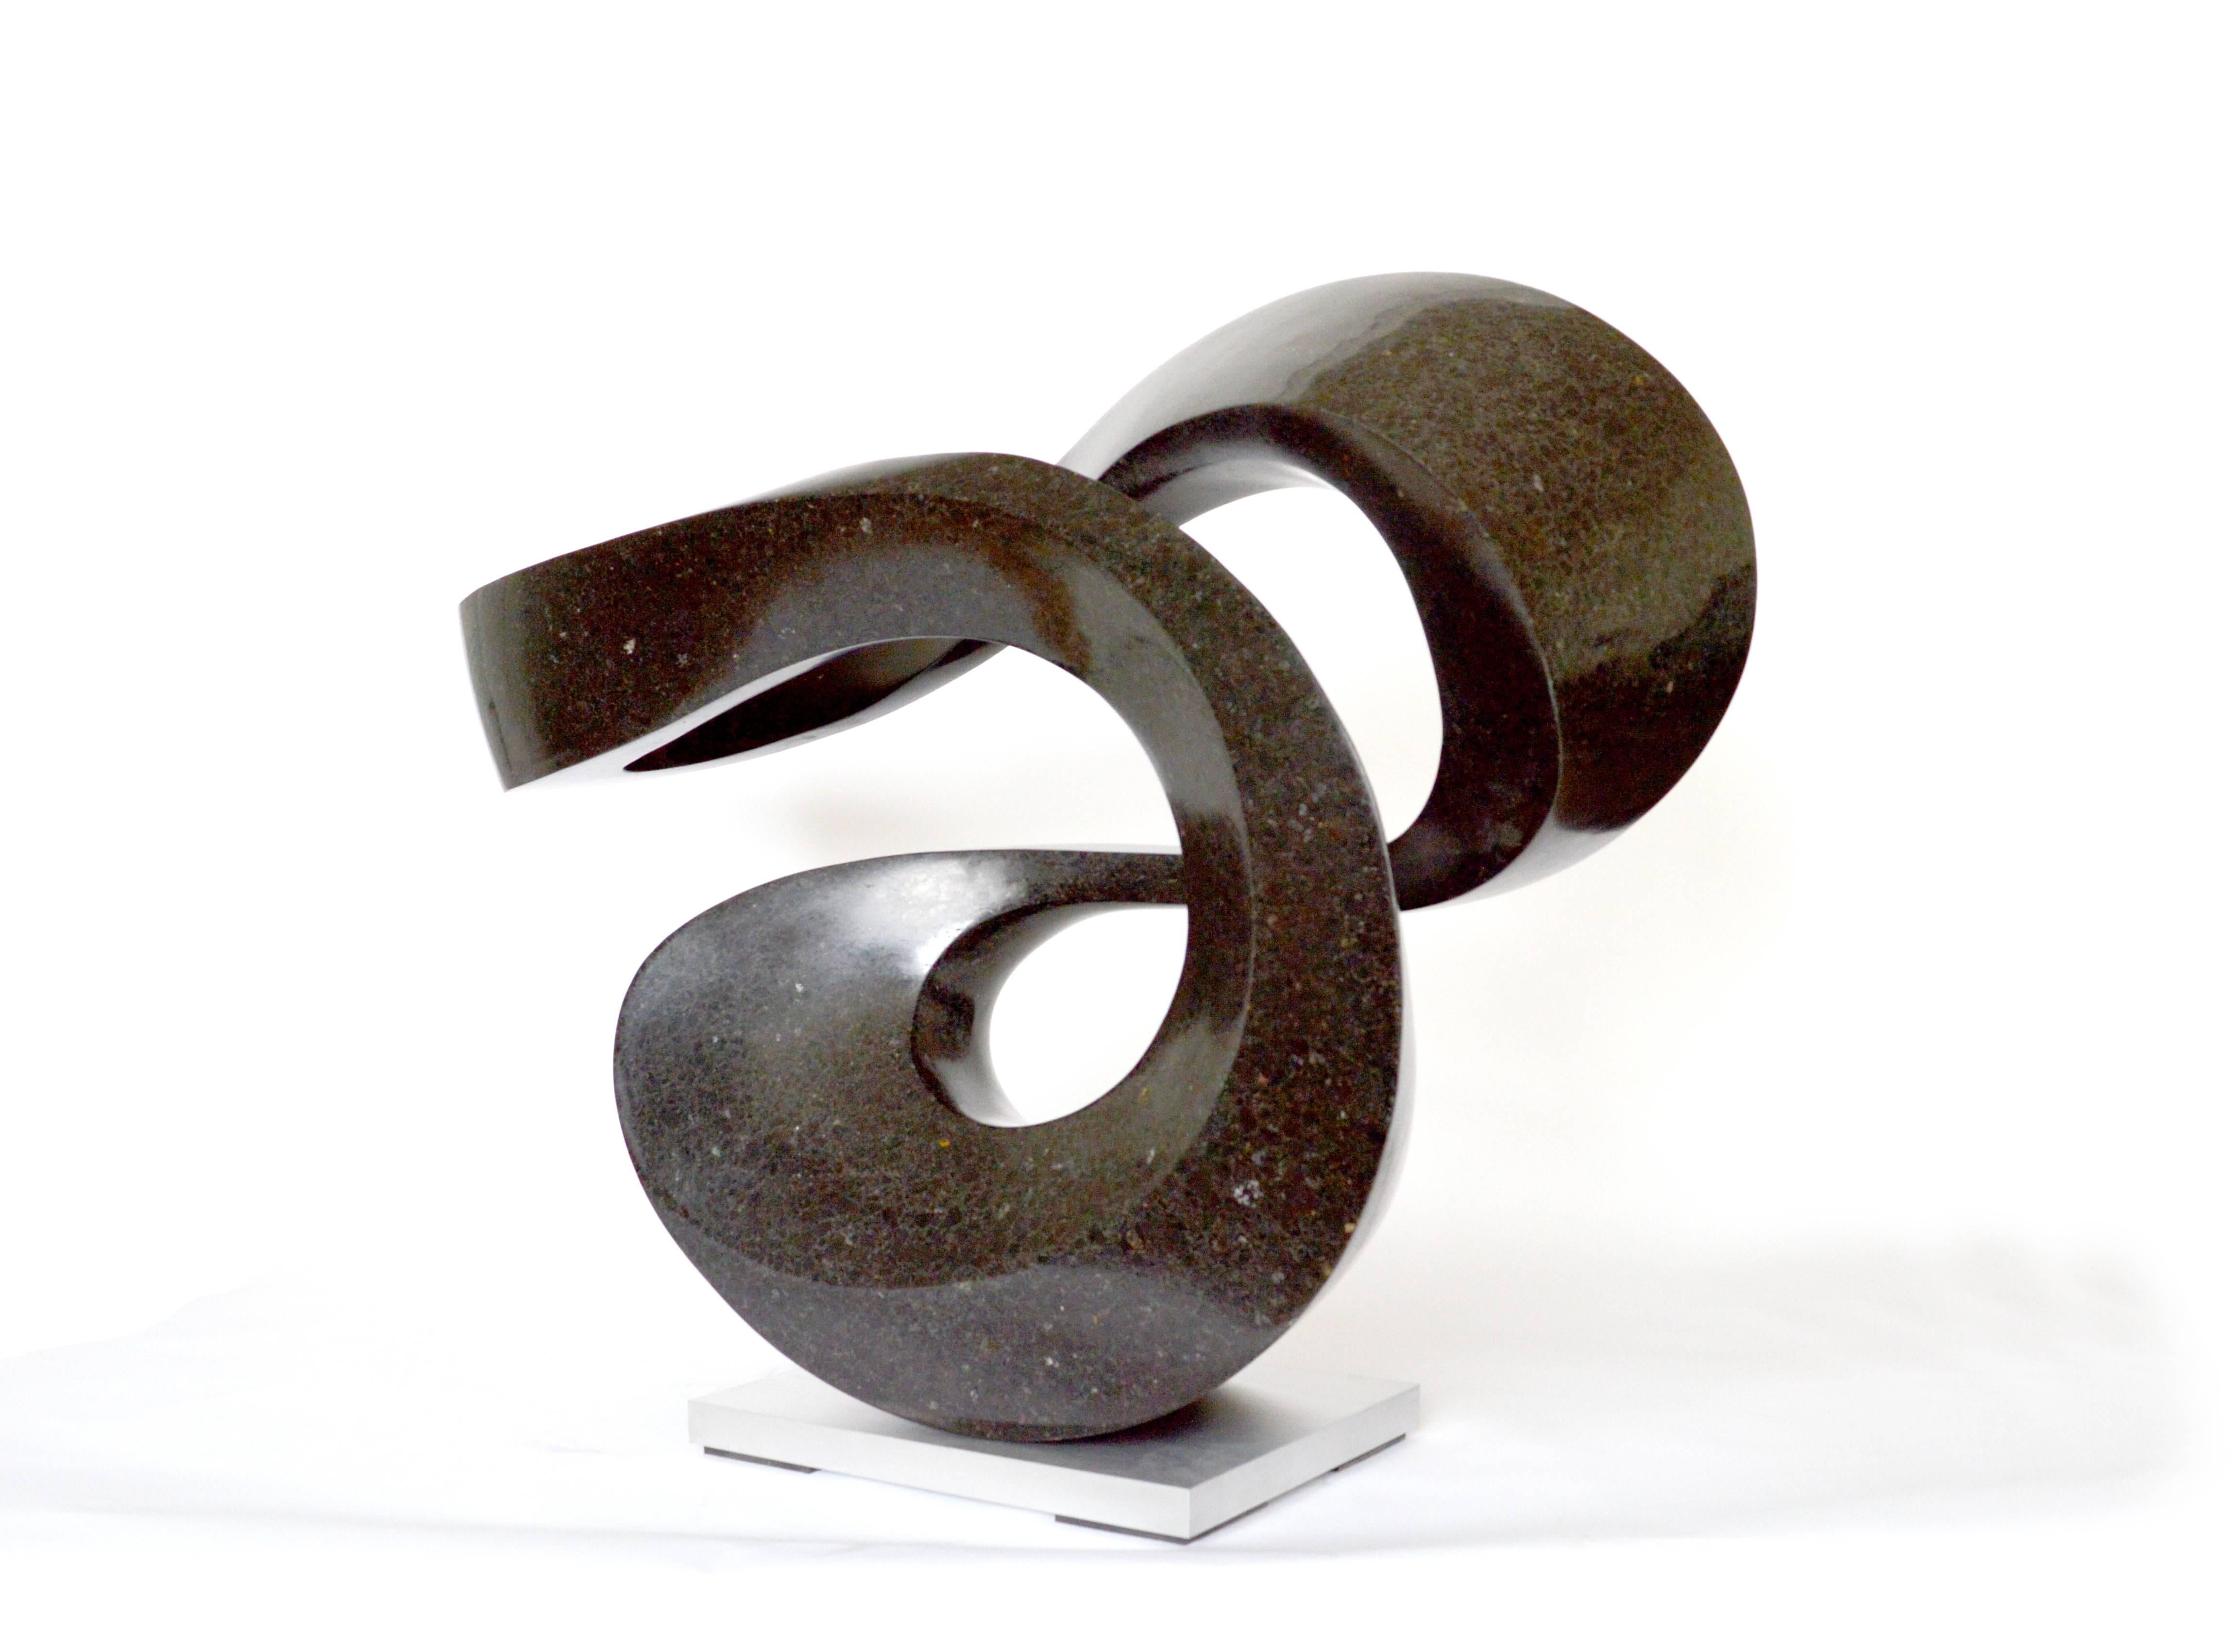 Zephyr Minor 6/50 - smooth, black, granite, indoor/outdoor, abstract sculpture - Gray Abstract Sculpture by Jeremy Guy